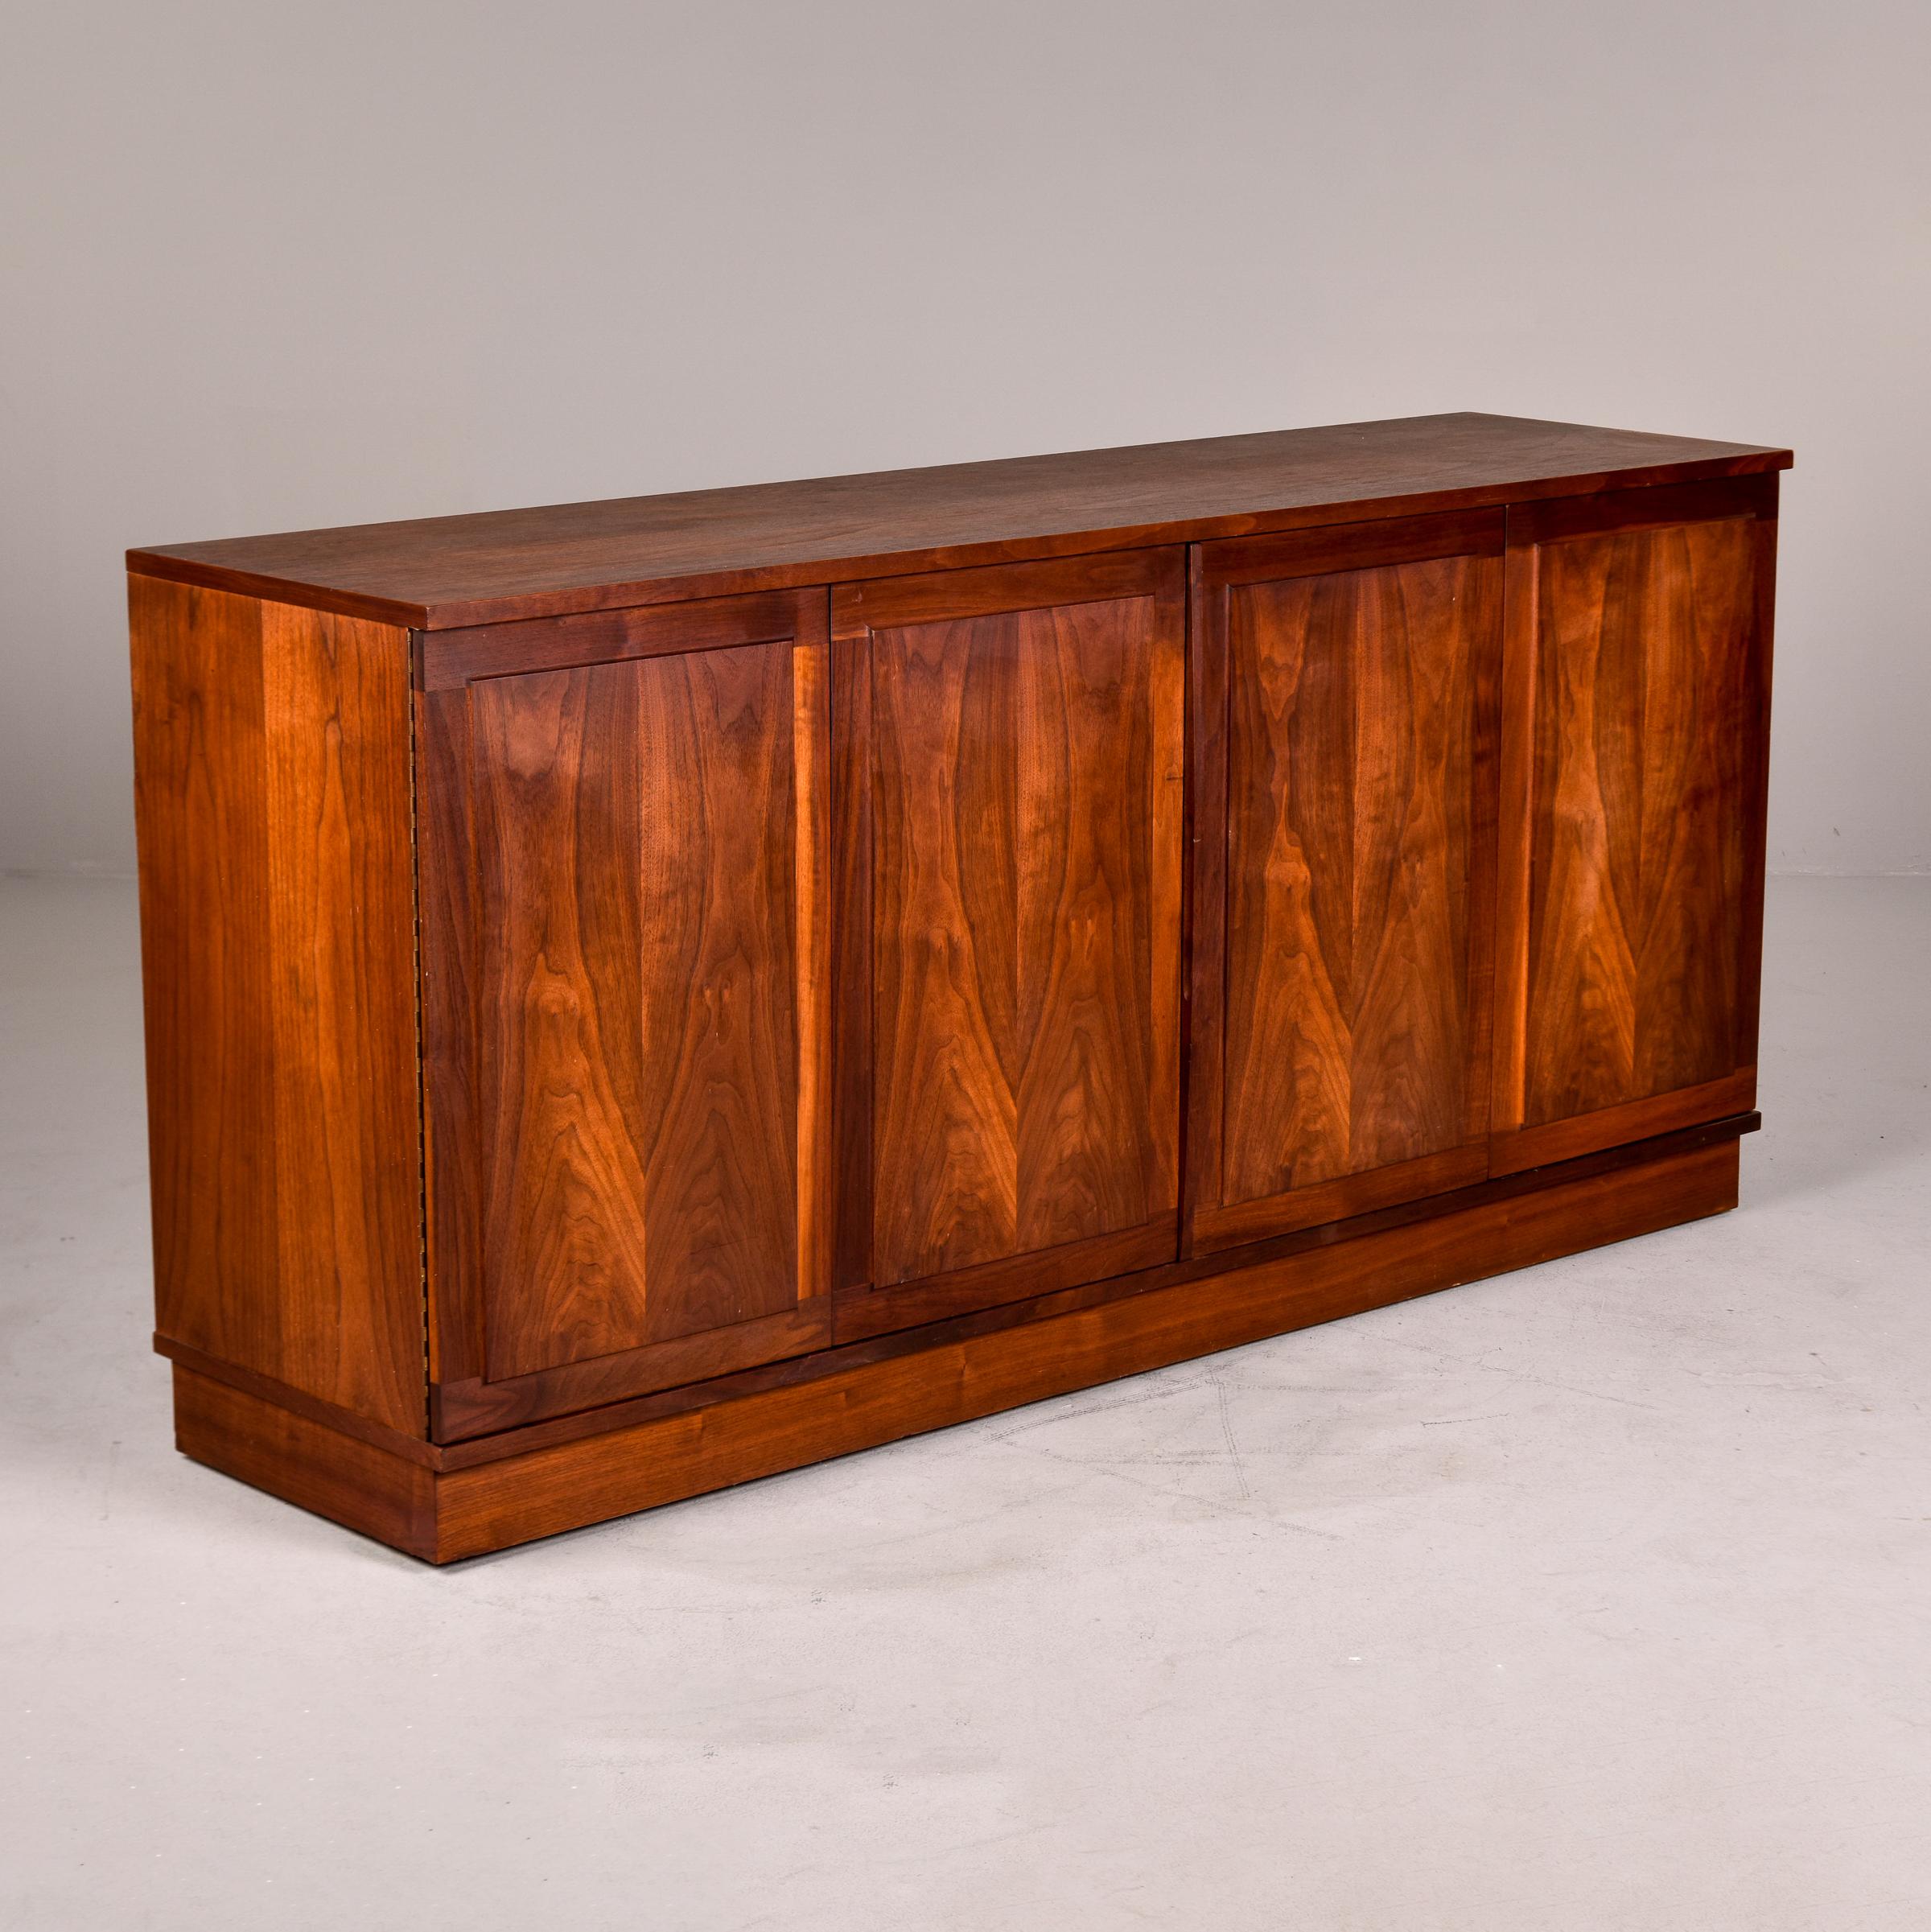 Found in the USA, this mid century walnut buffet dates from the 1960s. Four door panels are beautifully figured. Two doors of two panels each open to a lot of internal storage. Middle section has two wide, slender drawers with a single adjustable